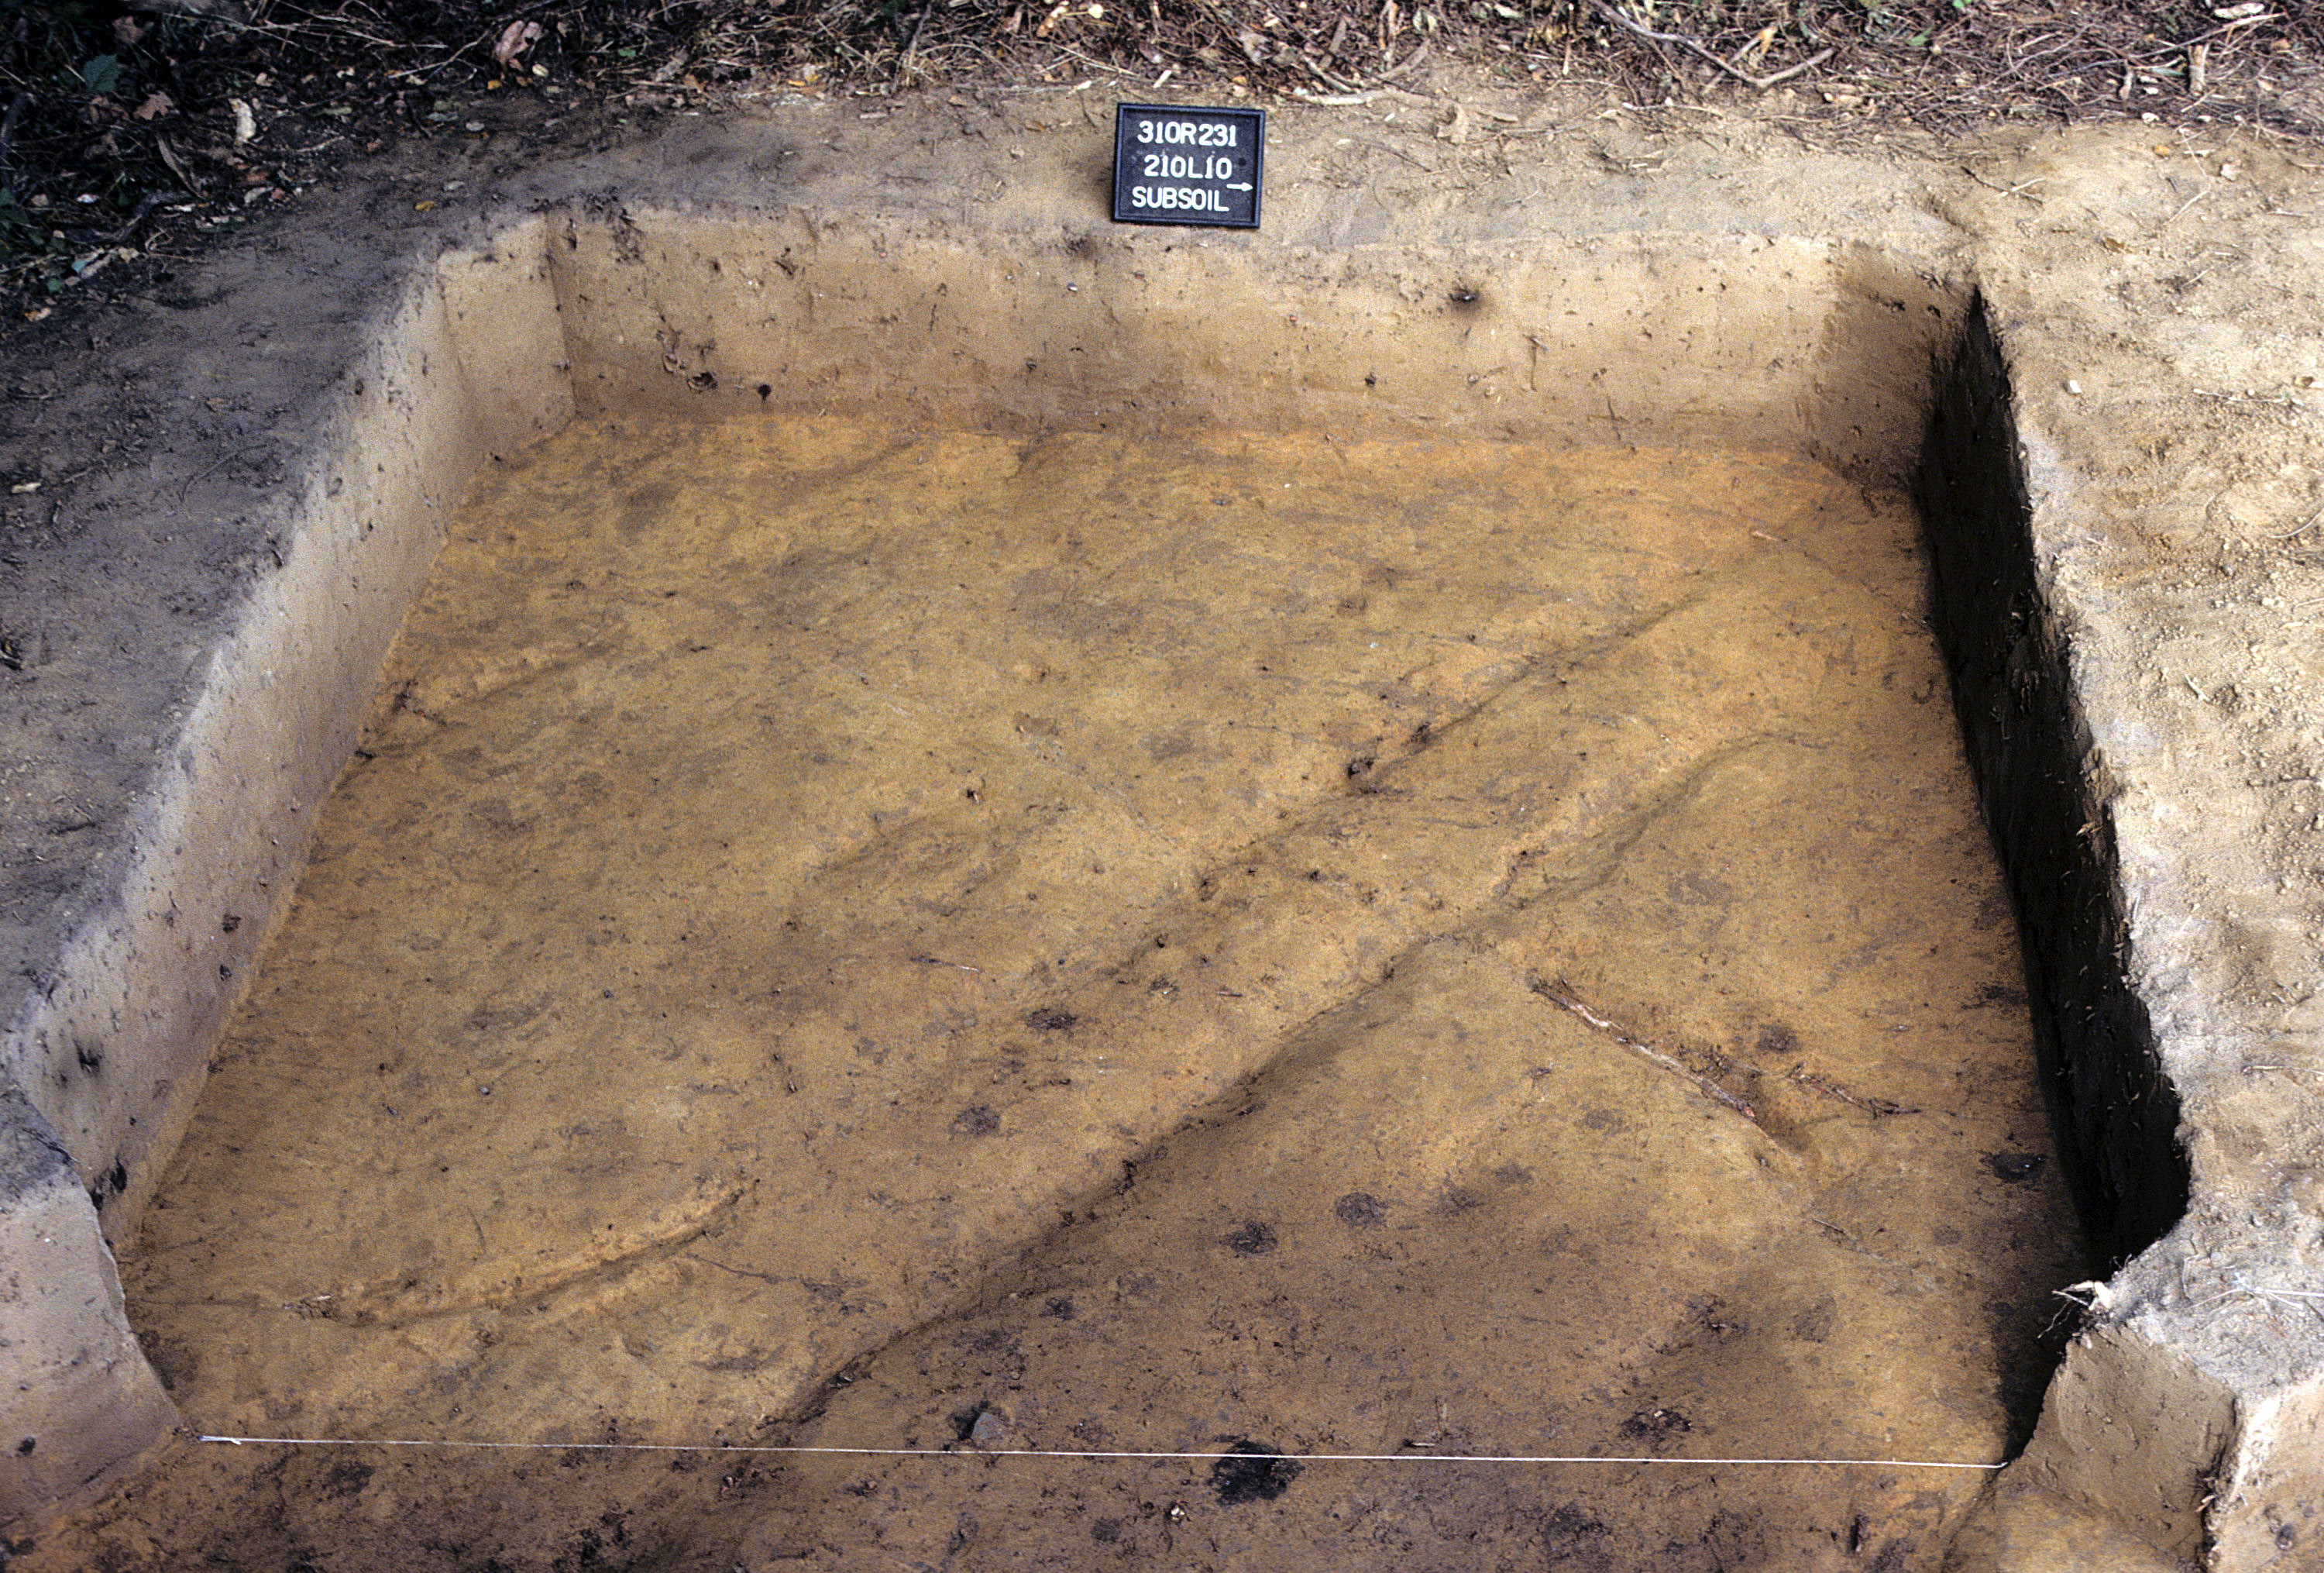 Figure 766. Sq. 210L10 at top of subsoil (view to west).